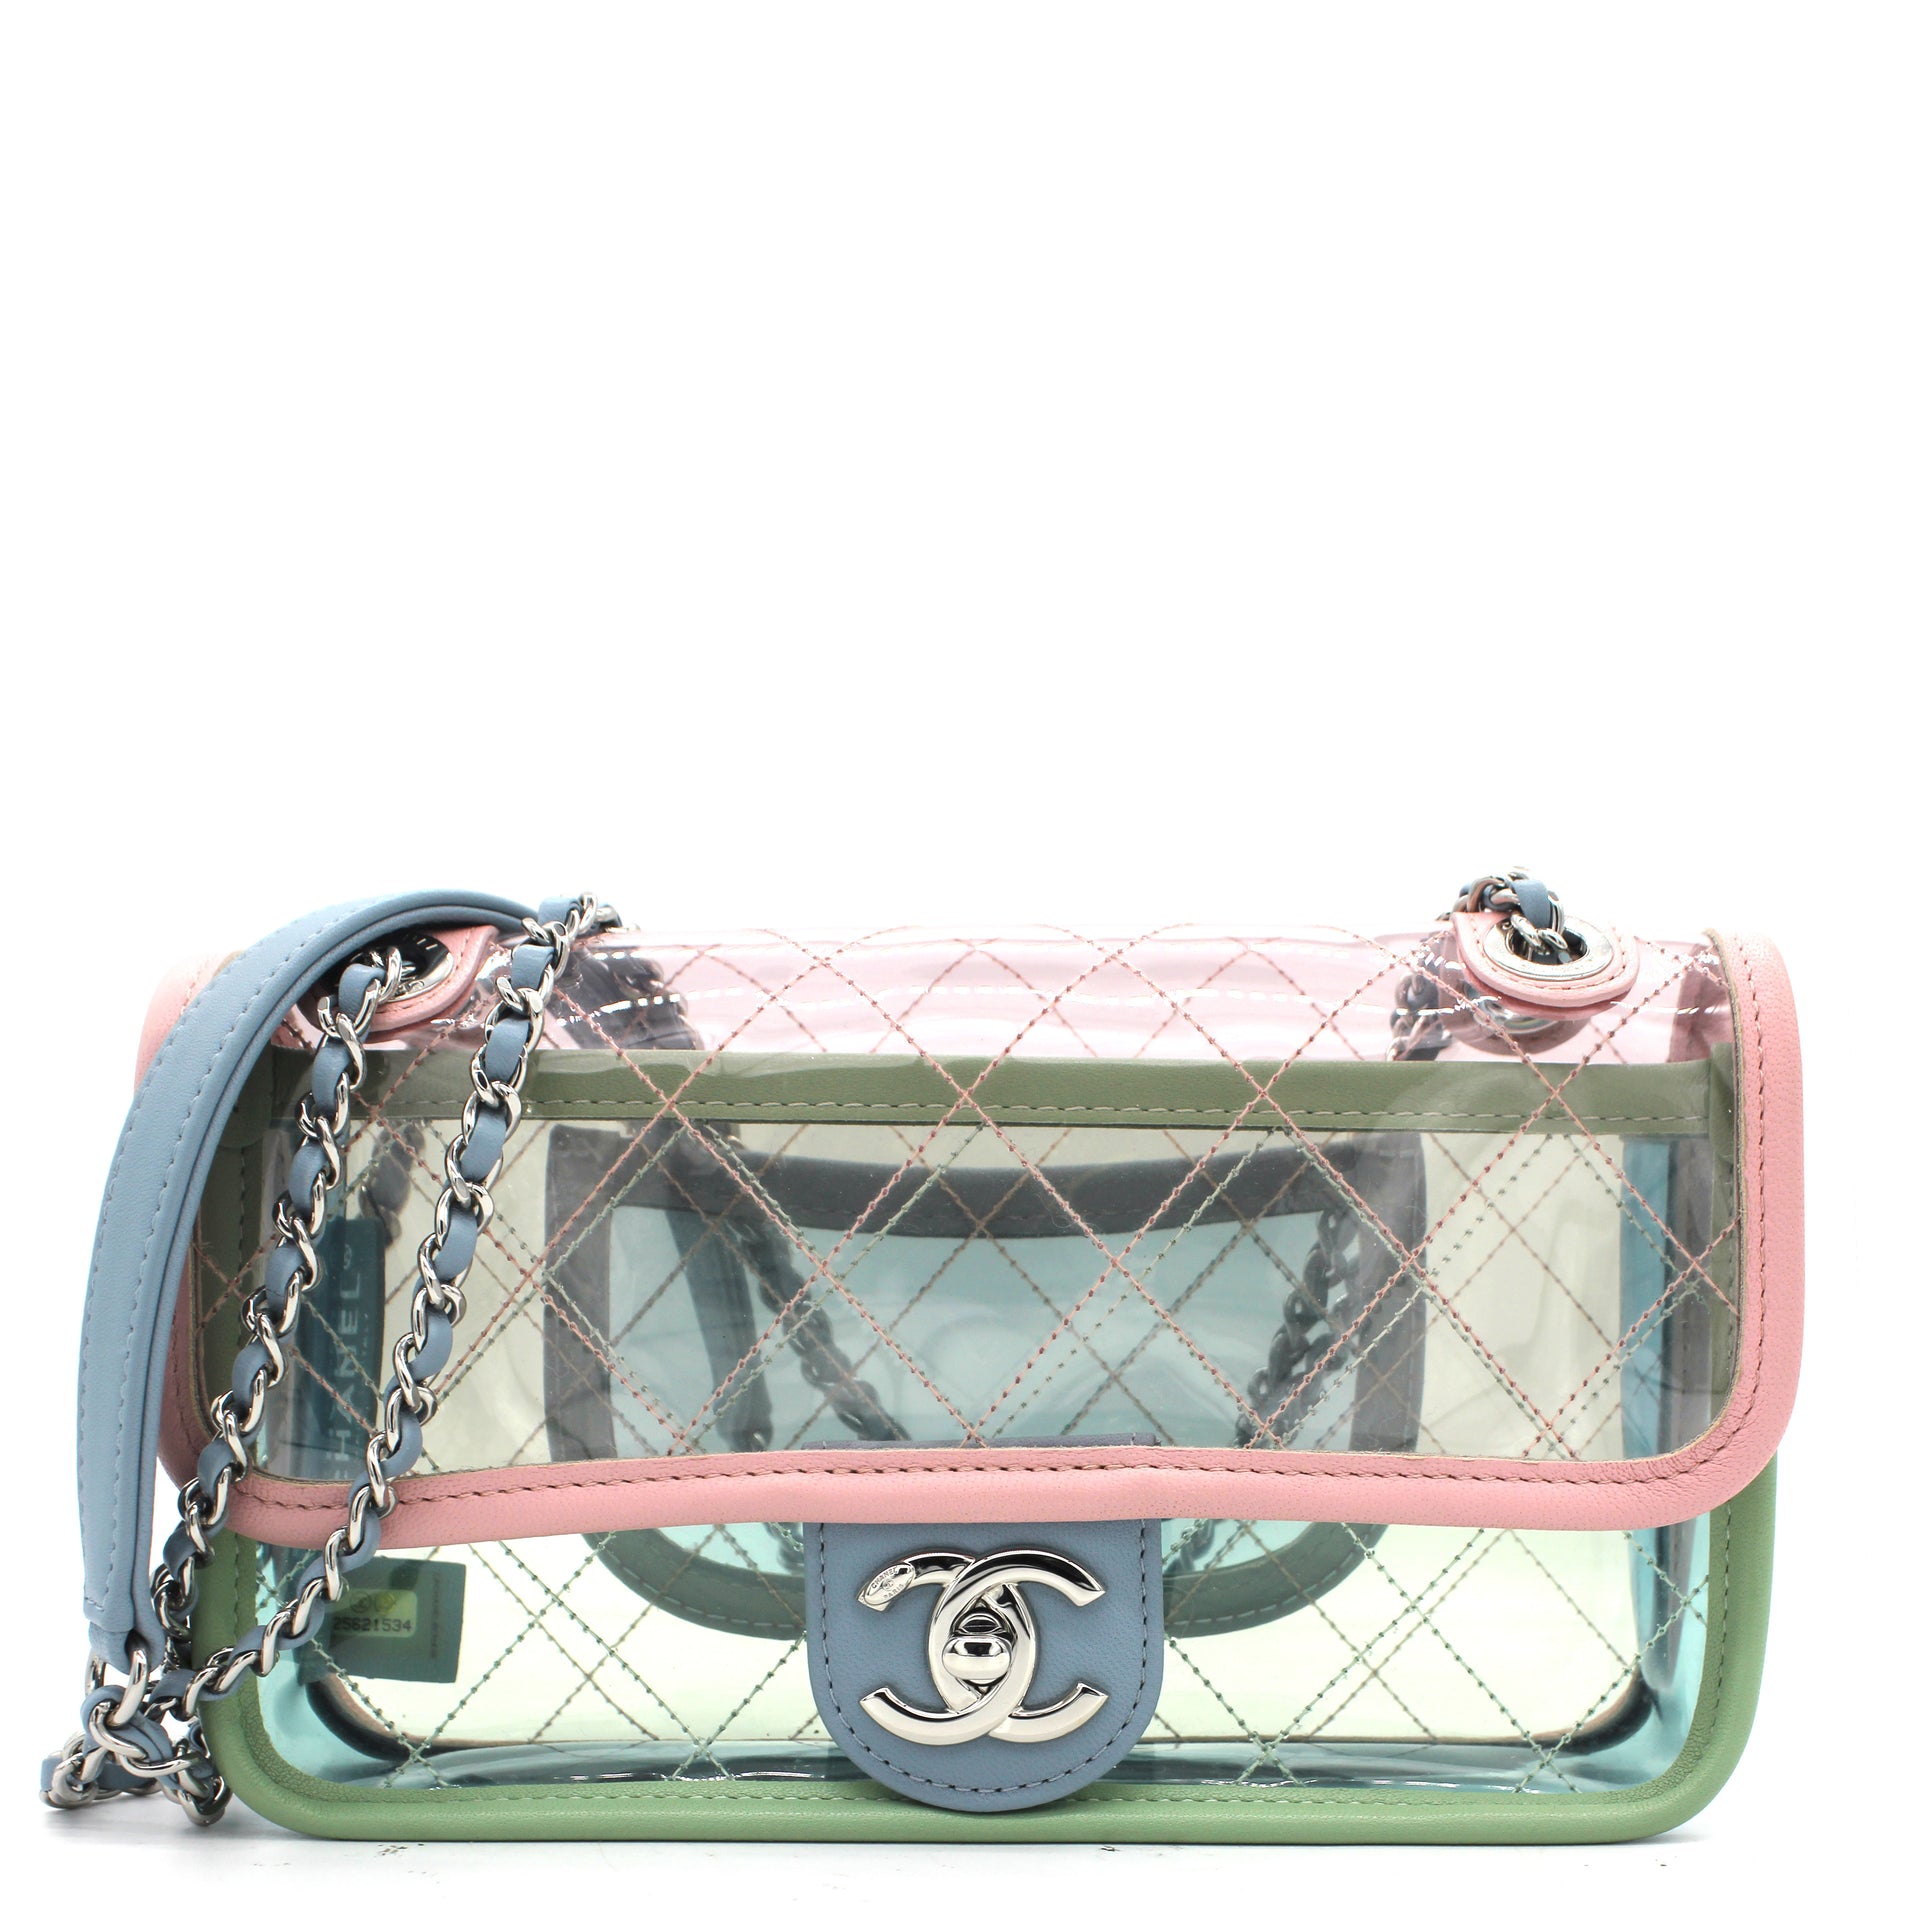 FWRD Renew Chanel Clear Chain Tote Bag in Green